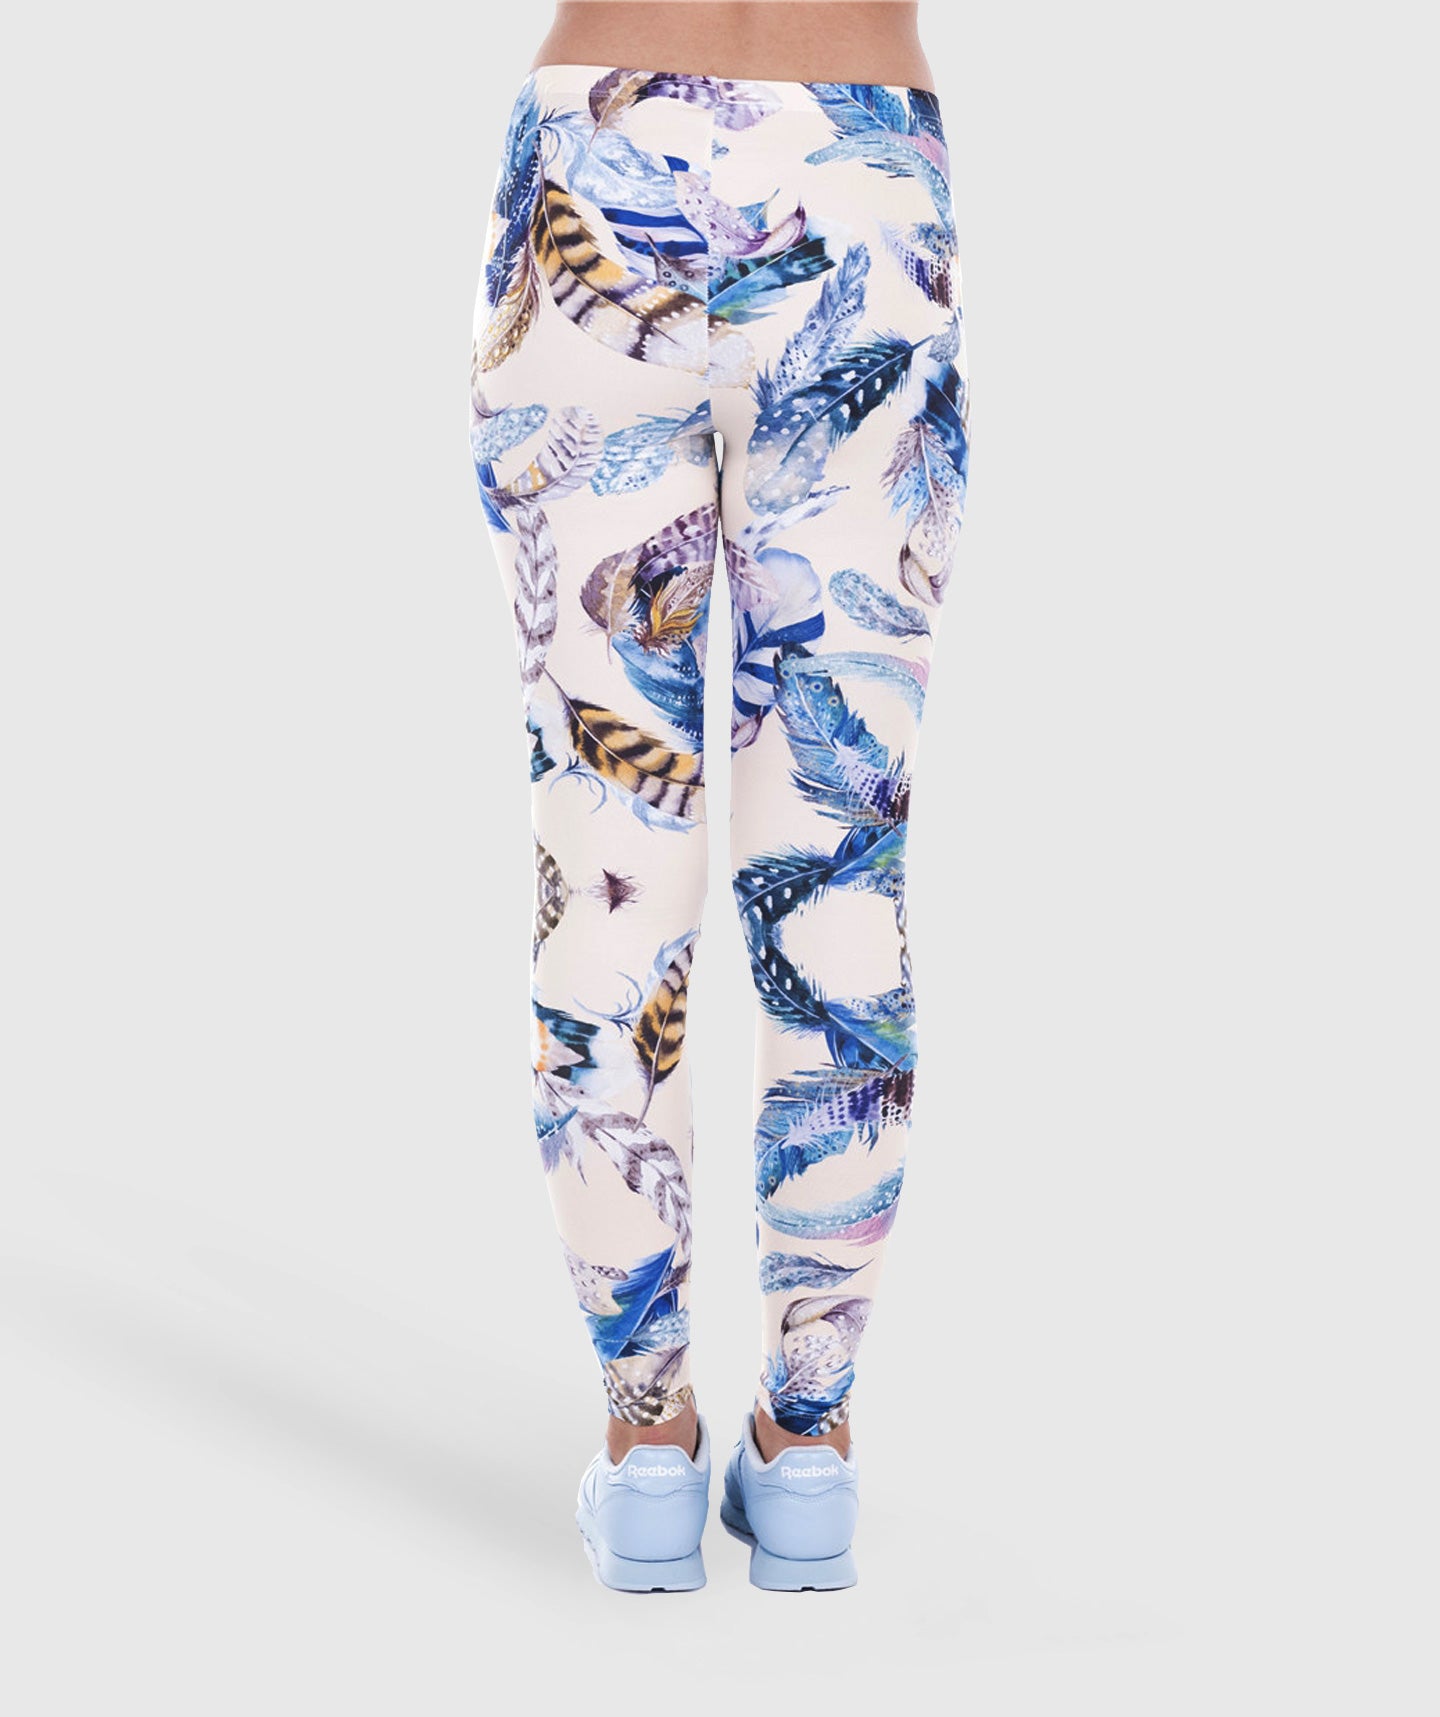 Pavo Leggings in Blue Feathers Print